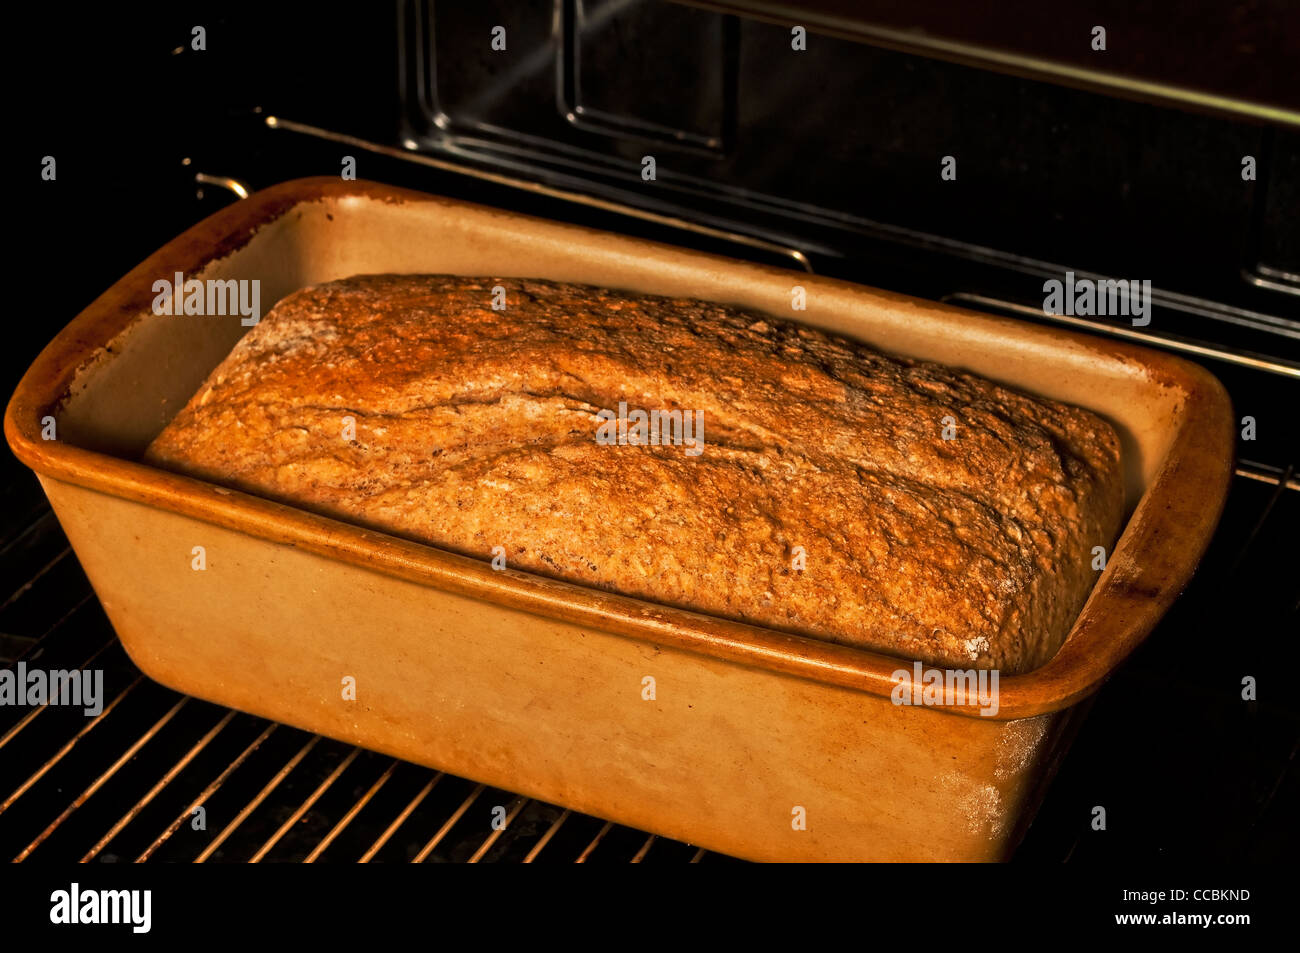 whole grain bread in an oven Stock Photo